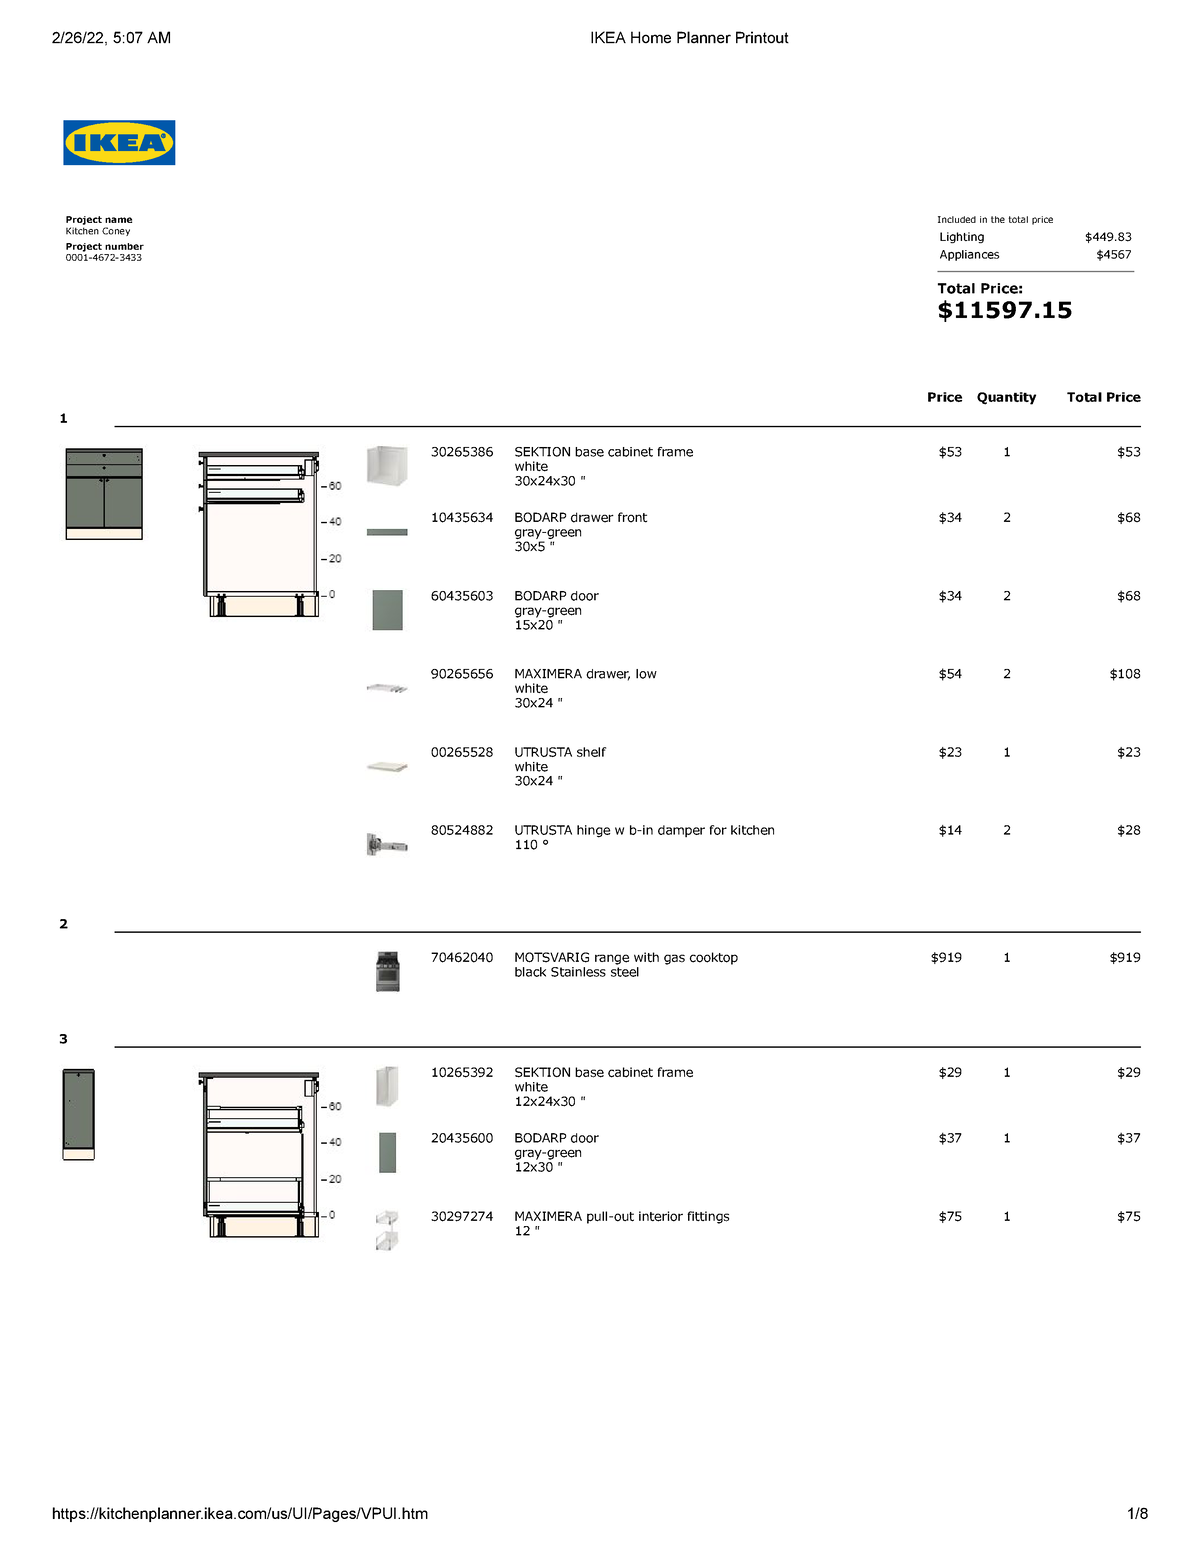 Mold bekymring Duplikering lecture notes IKEA Home Planner - Project name Kitchen Coney Project number  0001-4672- Included in - Studocu